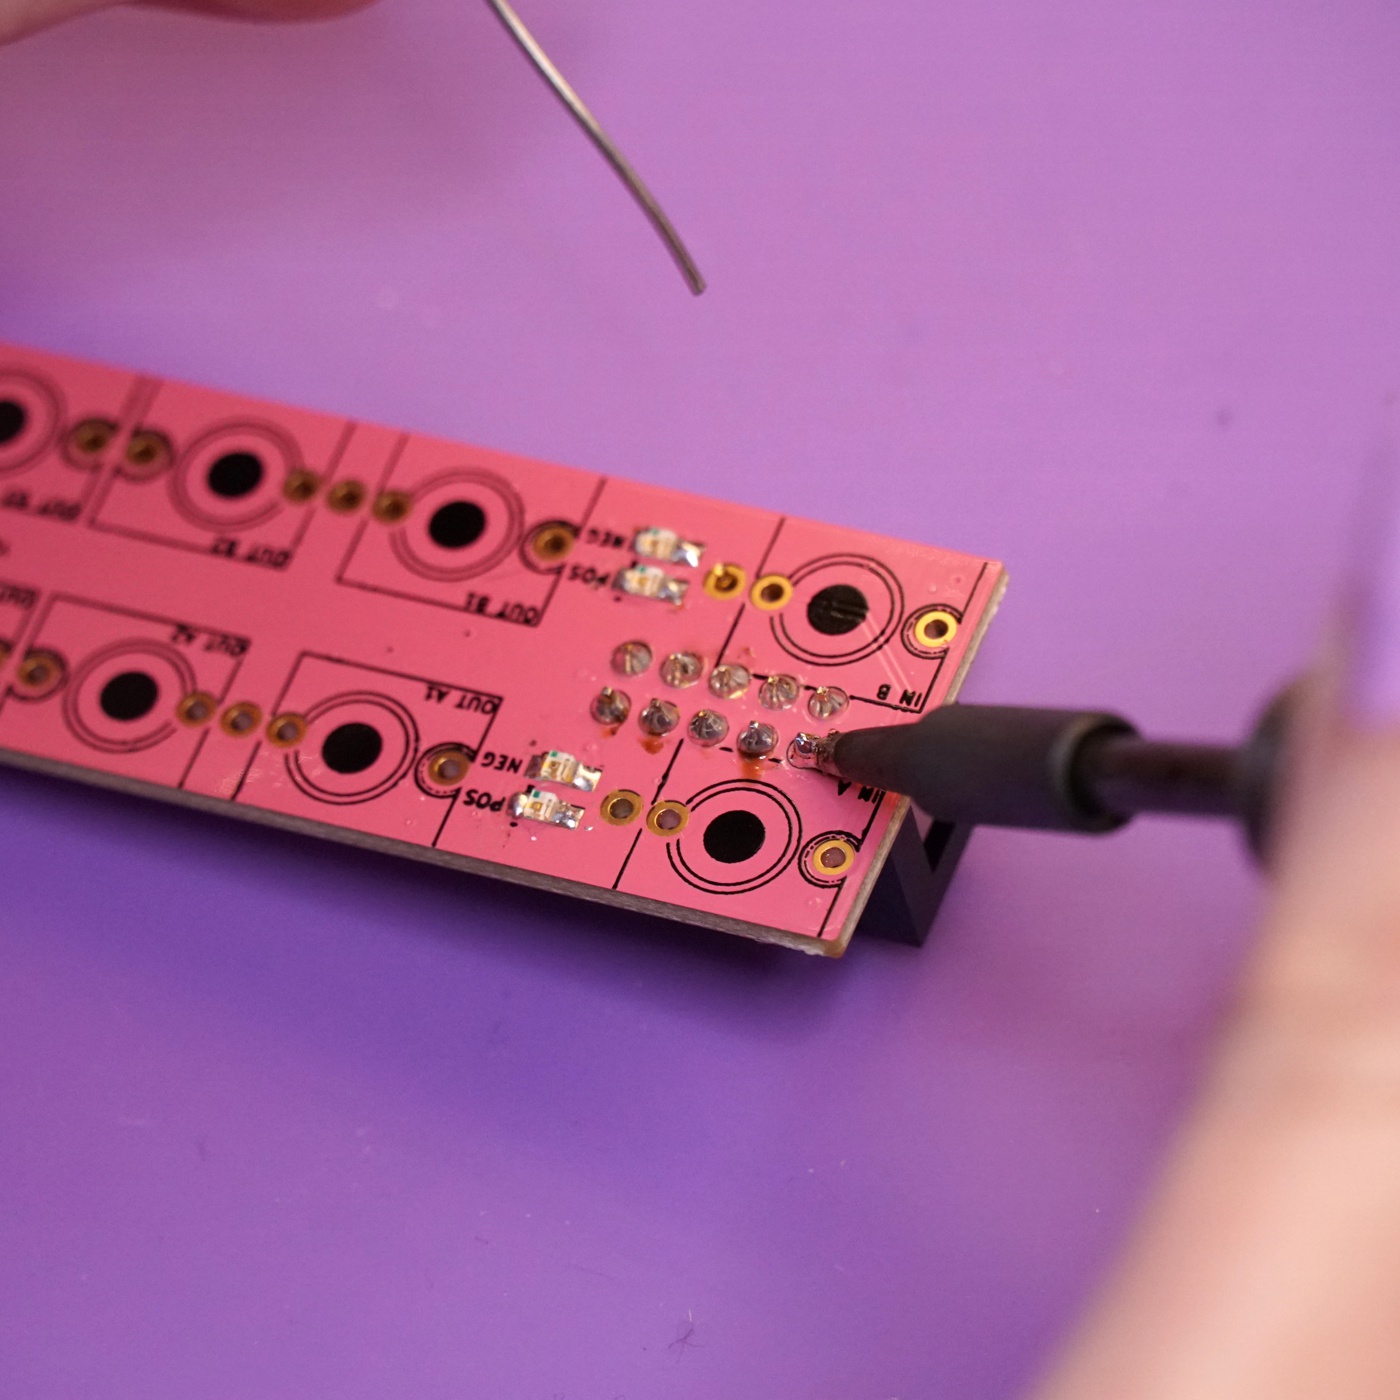 The power header being soldered to the mainboard